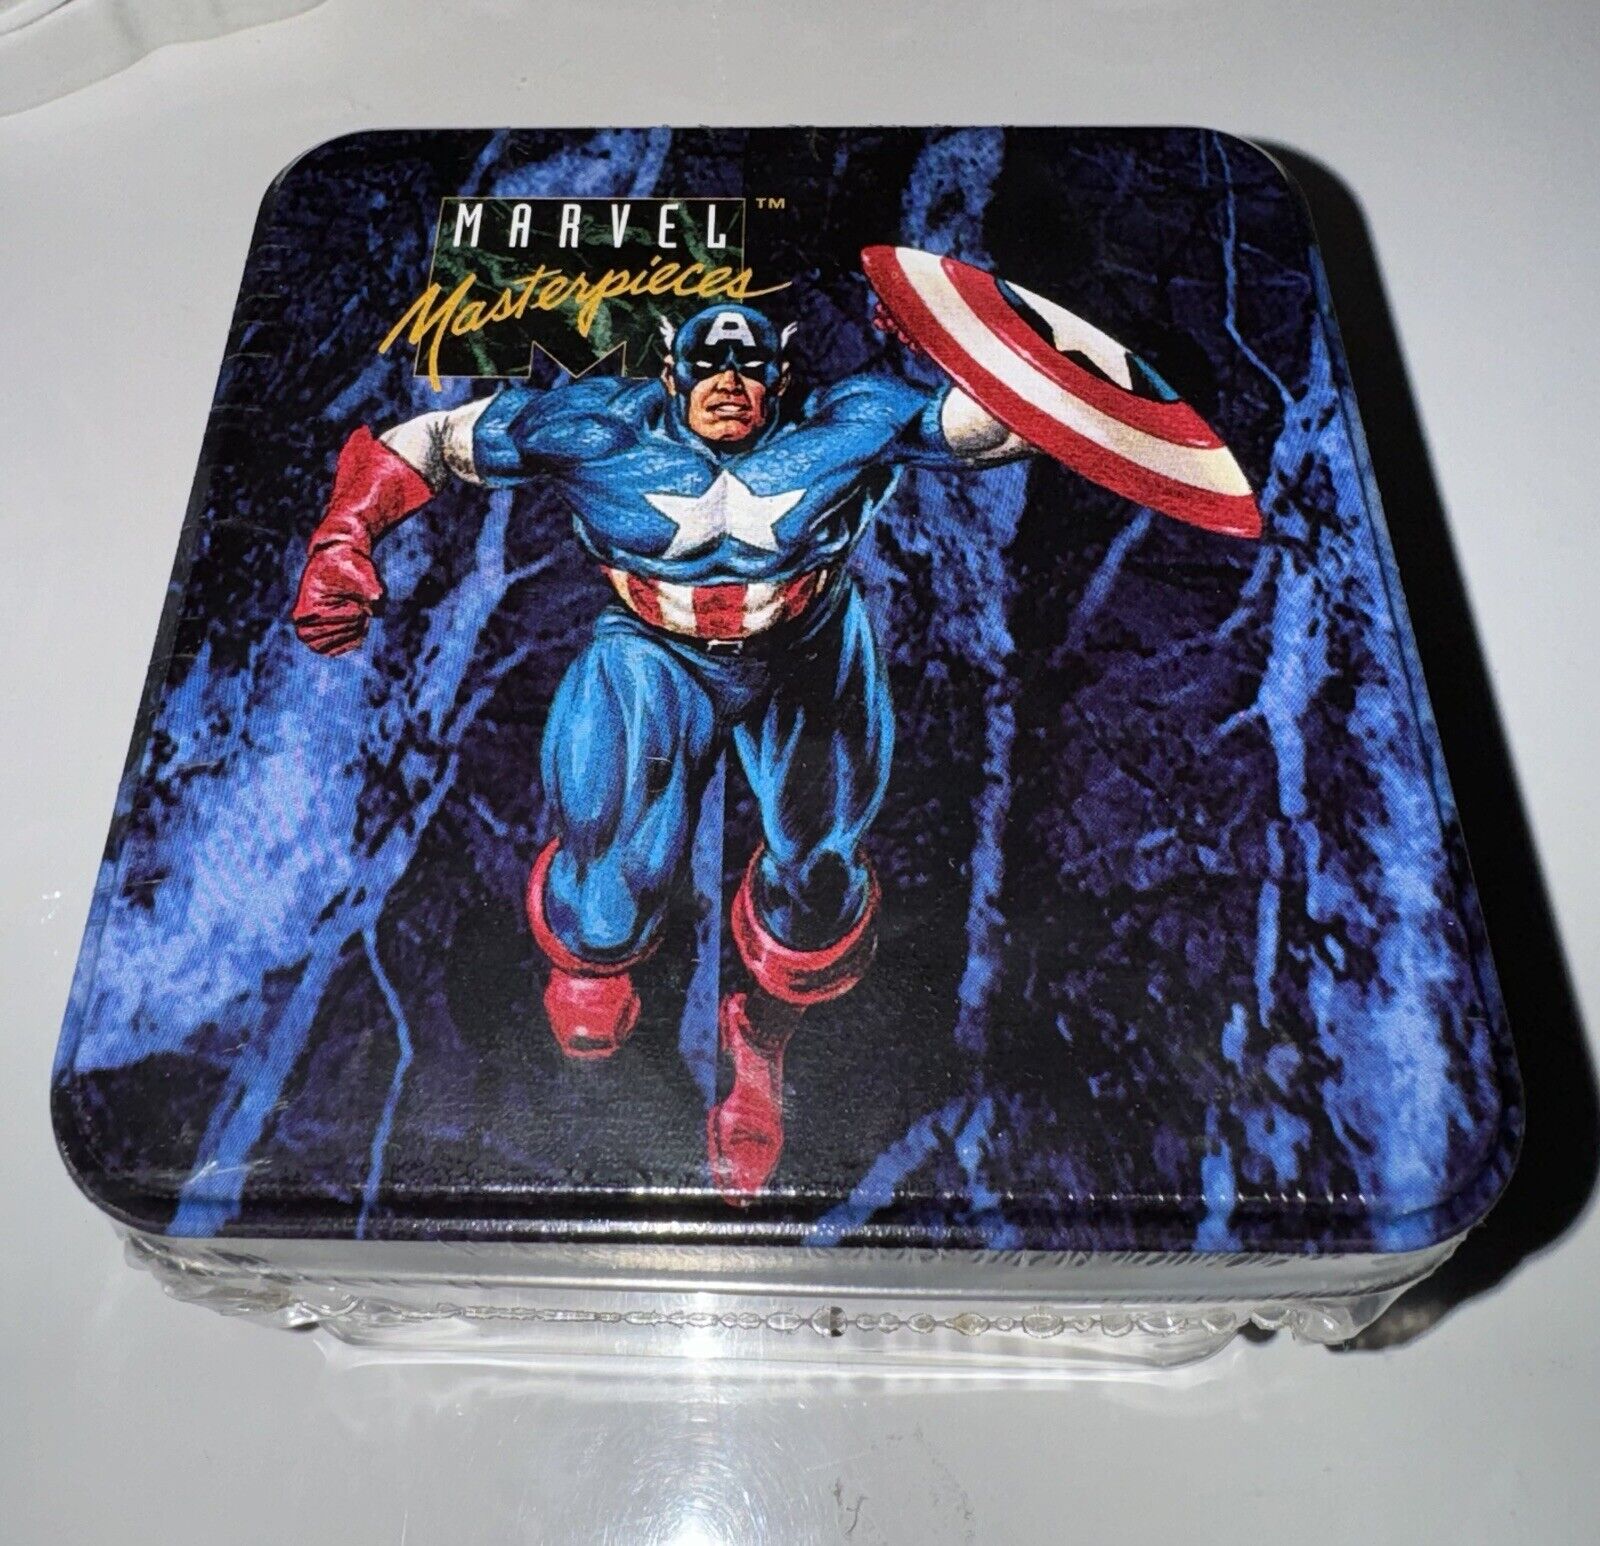 Marvel Masterpieces 1992 Series-1 Factory Sealed Tin Master Set #22699 of 35000